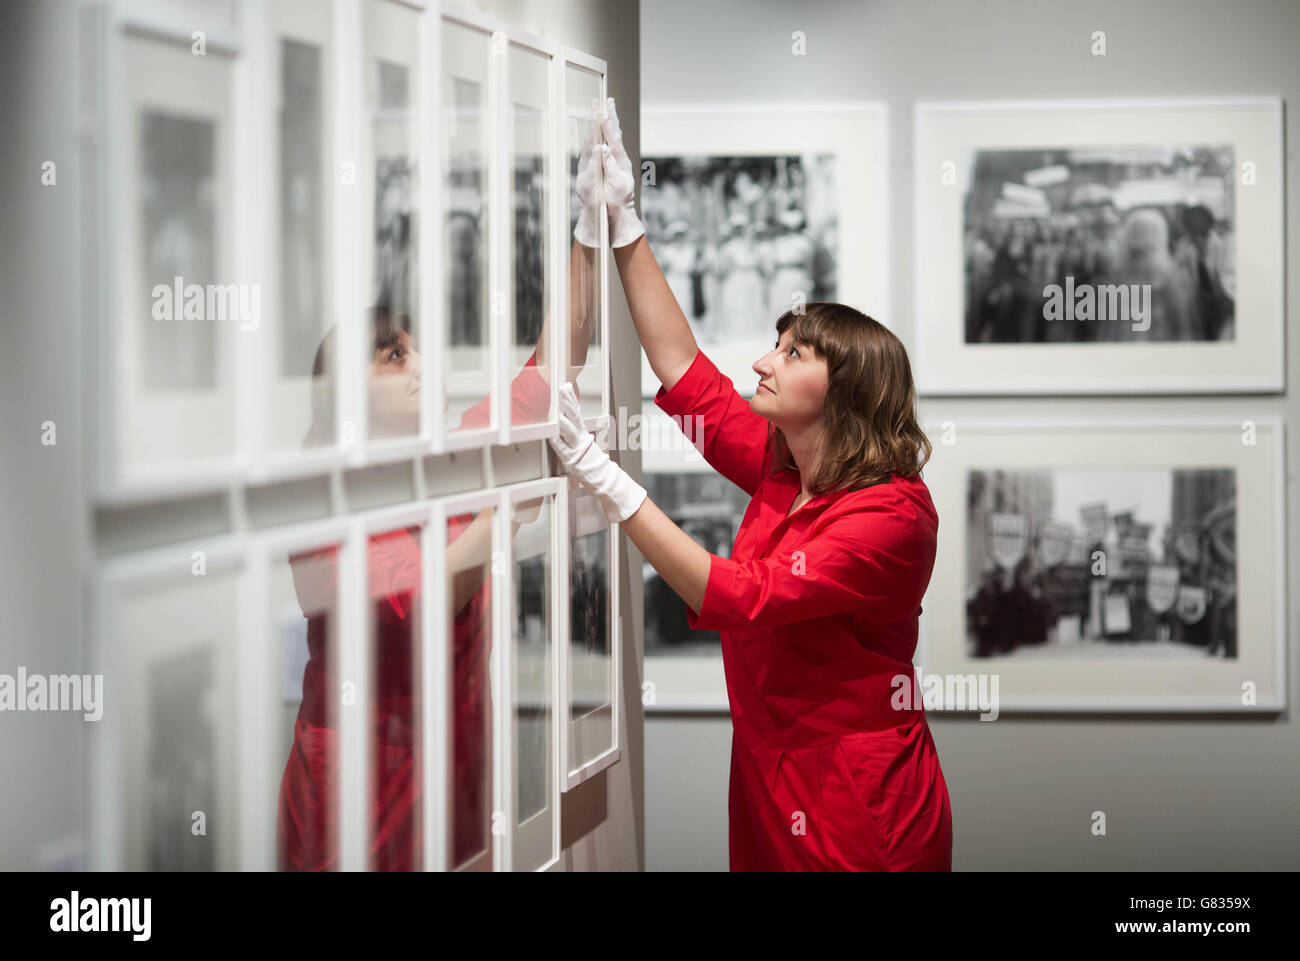 EDITORIAL USE ONLY Exhibition curator Anna Sparham inspects a display at the Museum of London Docklands ahead of the opening of their latest exhibition Soldiers and Suffragettes: The Photography of Christina Broom, a free exhibition opening to the public from Friday 19th June. Stock Photo